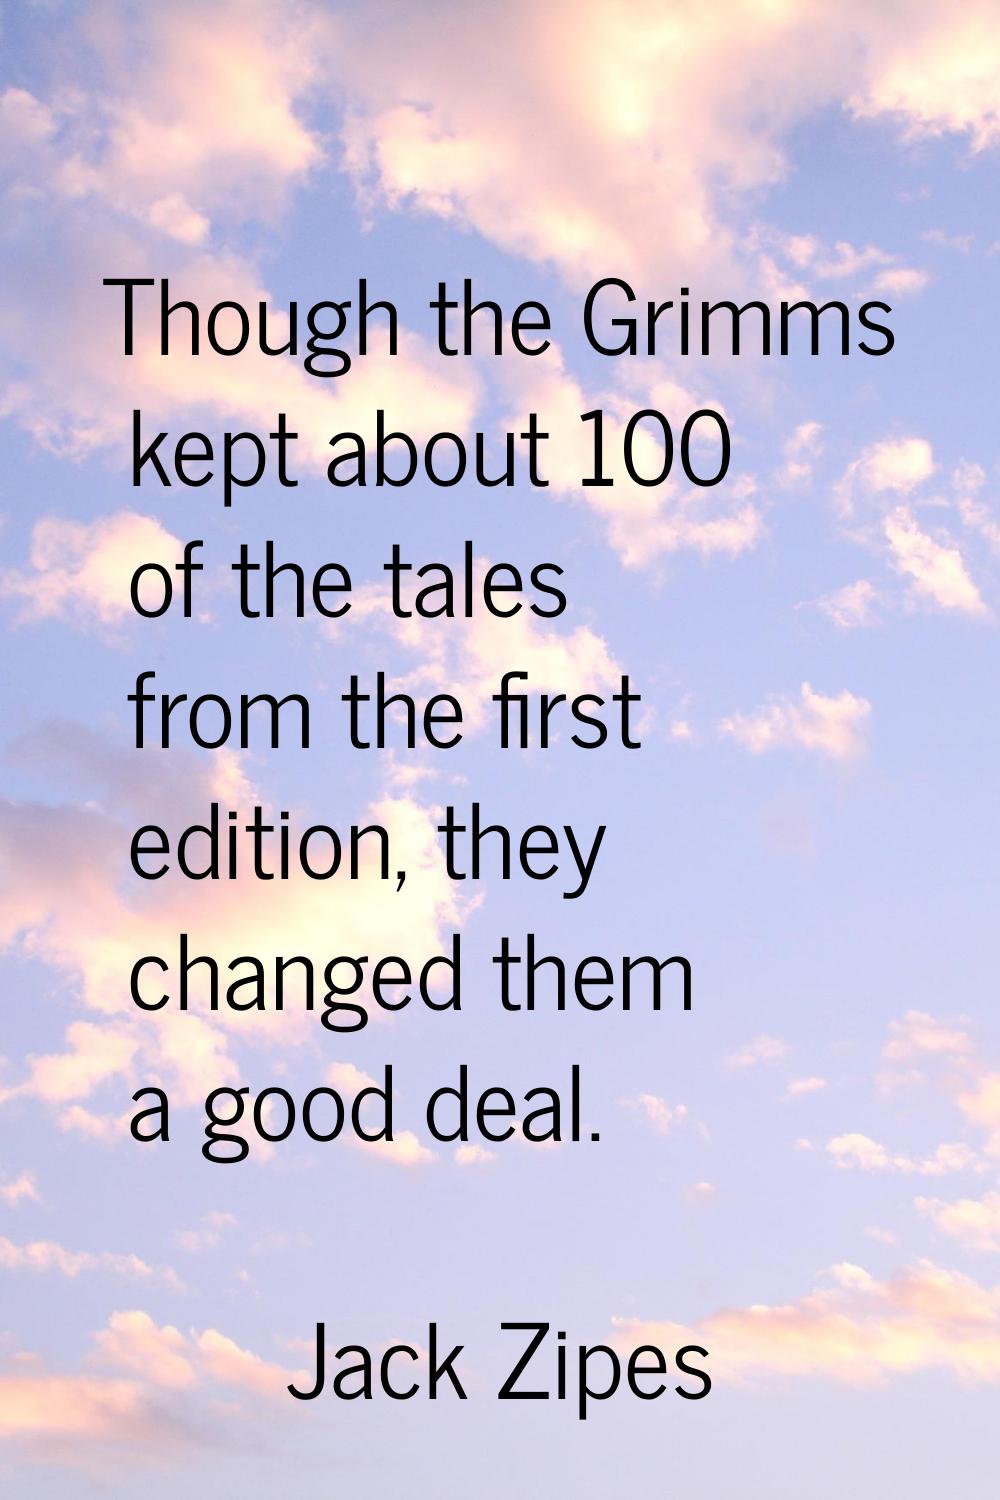 Though the Grimms kept about 100 of the tales from the first edition, they changed them a good deal